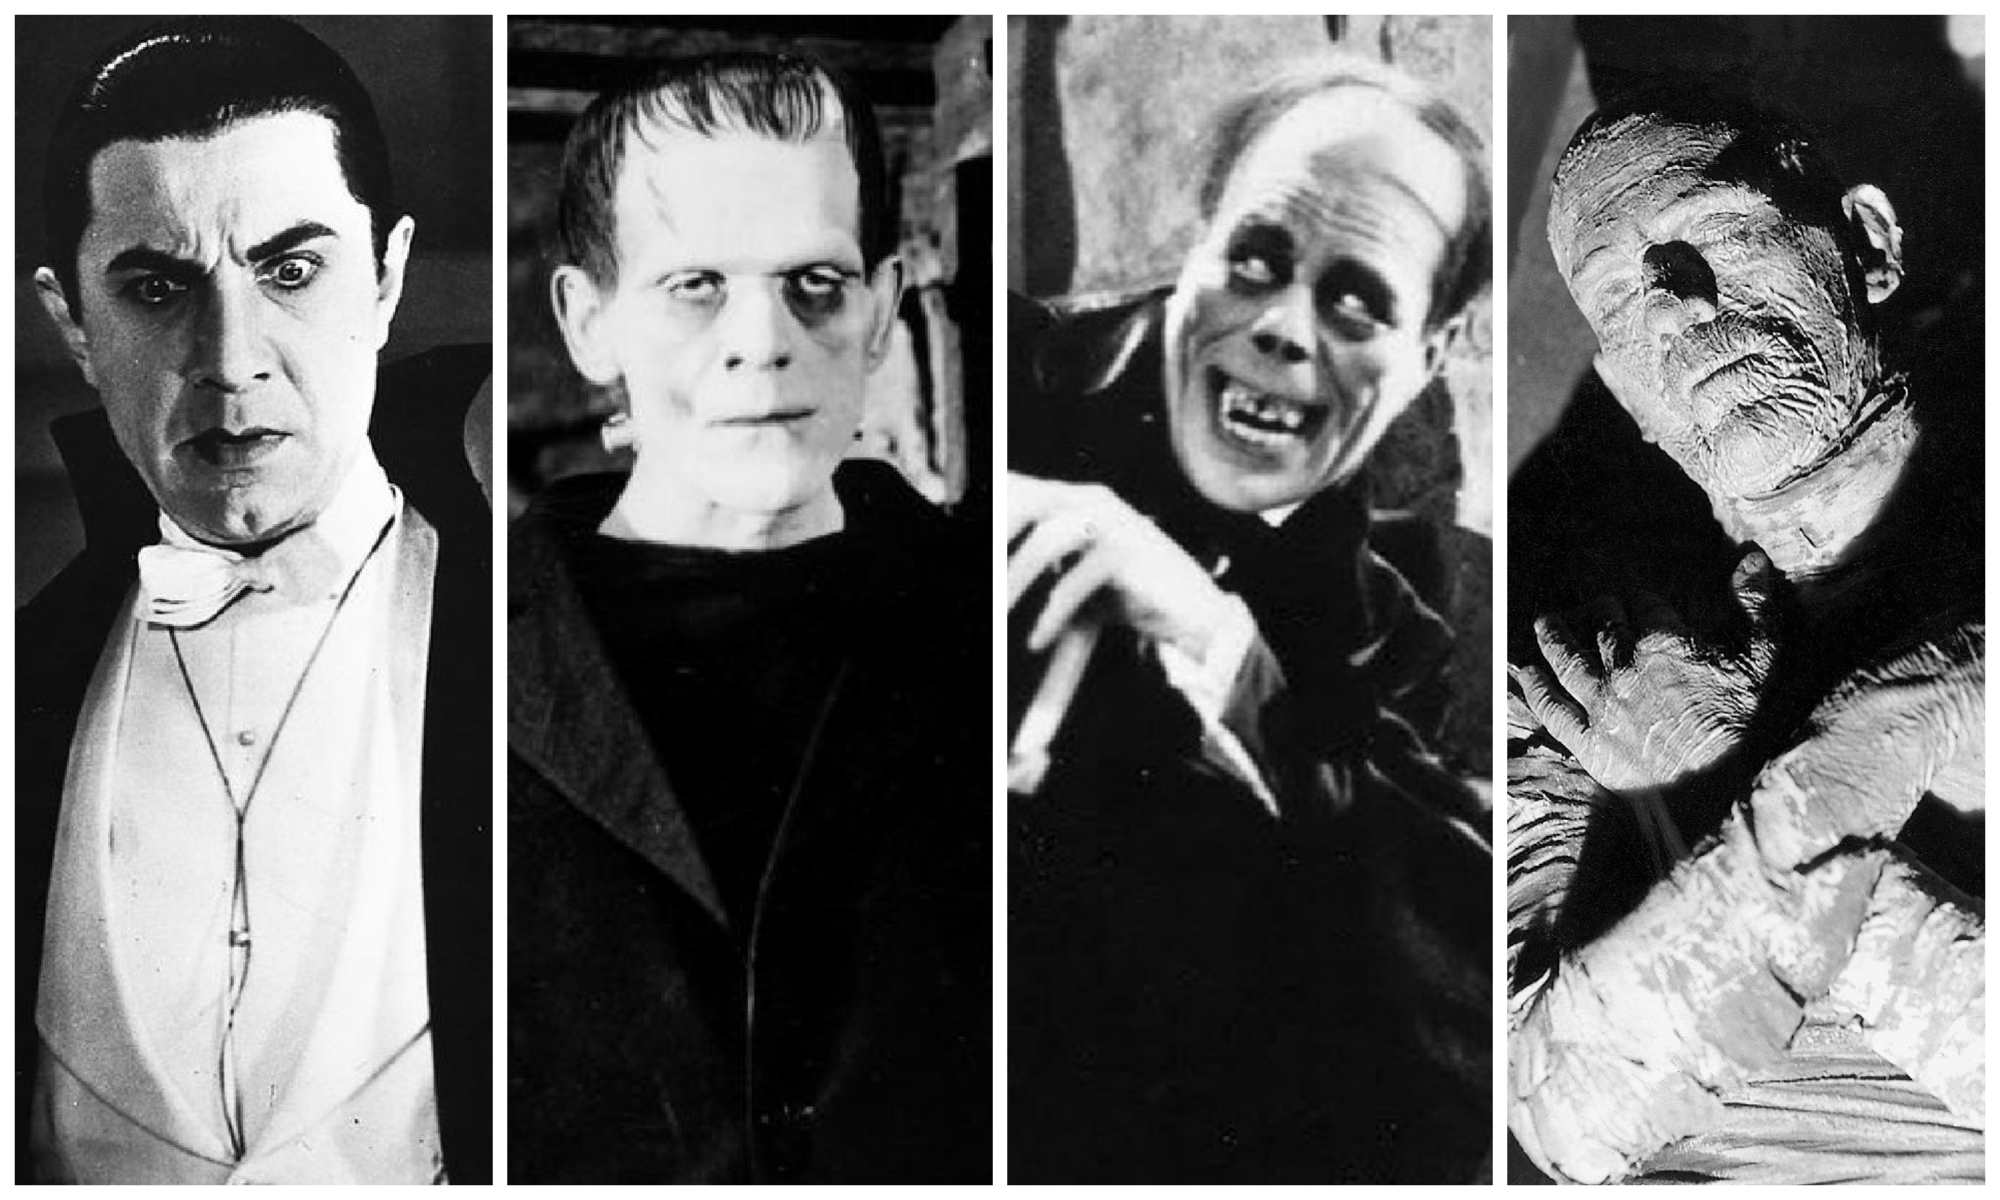 Can You Defeat Our Fiendishly Hard Universal Monster Movie Quiz?